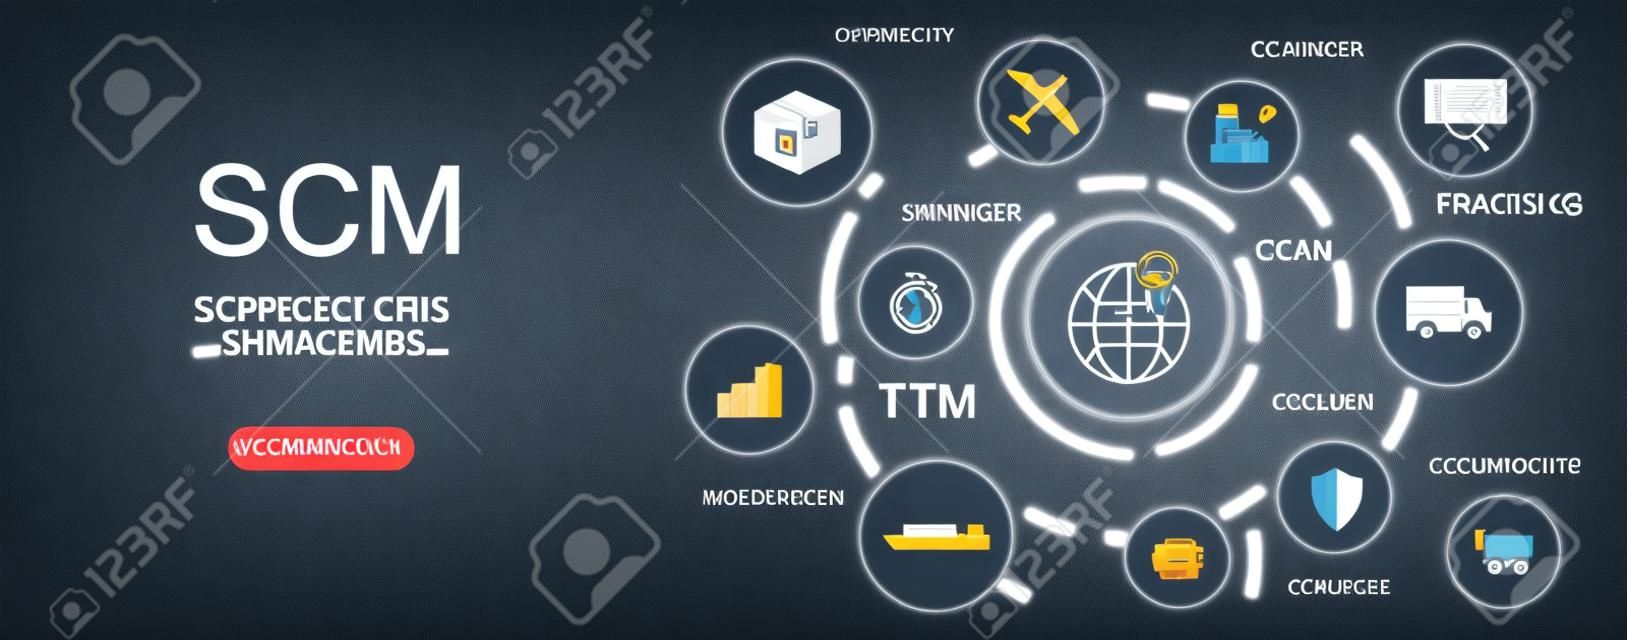 SCM Vector Banner. Supply Chain Management, Aspects of Modern Company Logistics Processes. Business Challenges Design. SCM - Supply Chain Management Banner with Keywords and Icons.